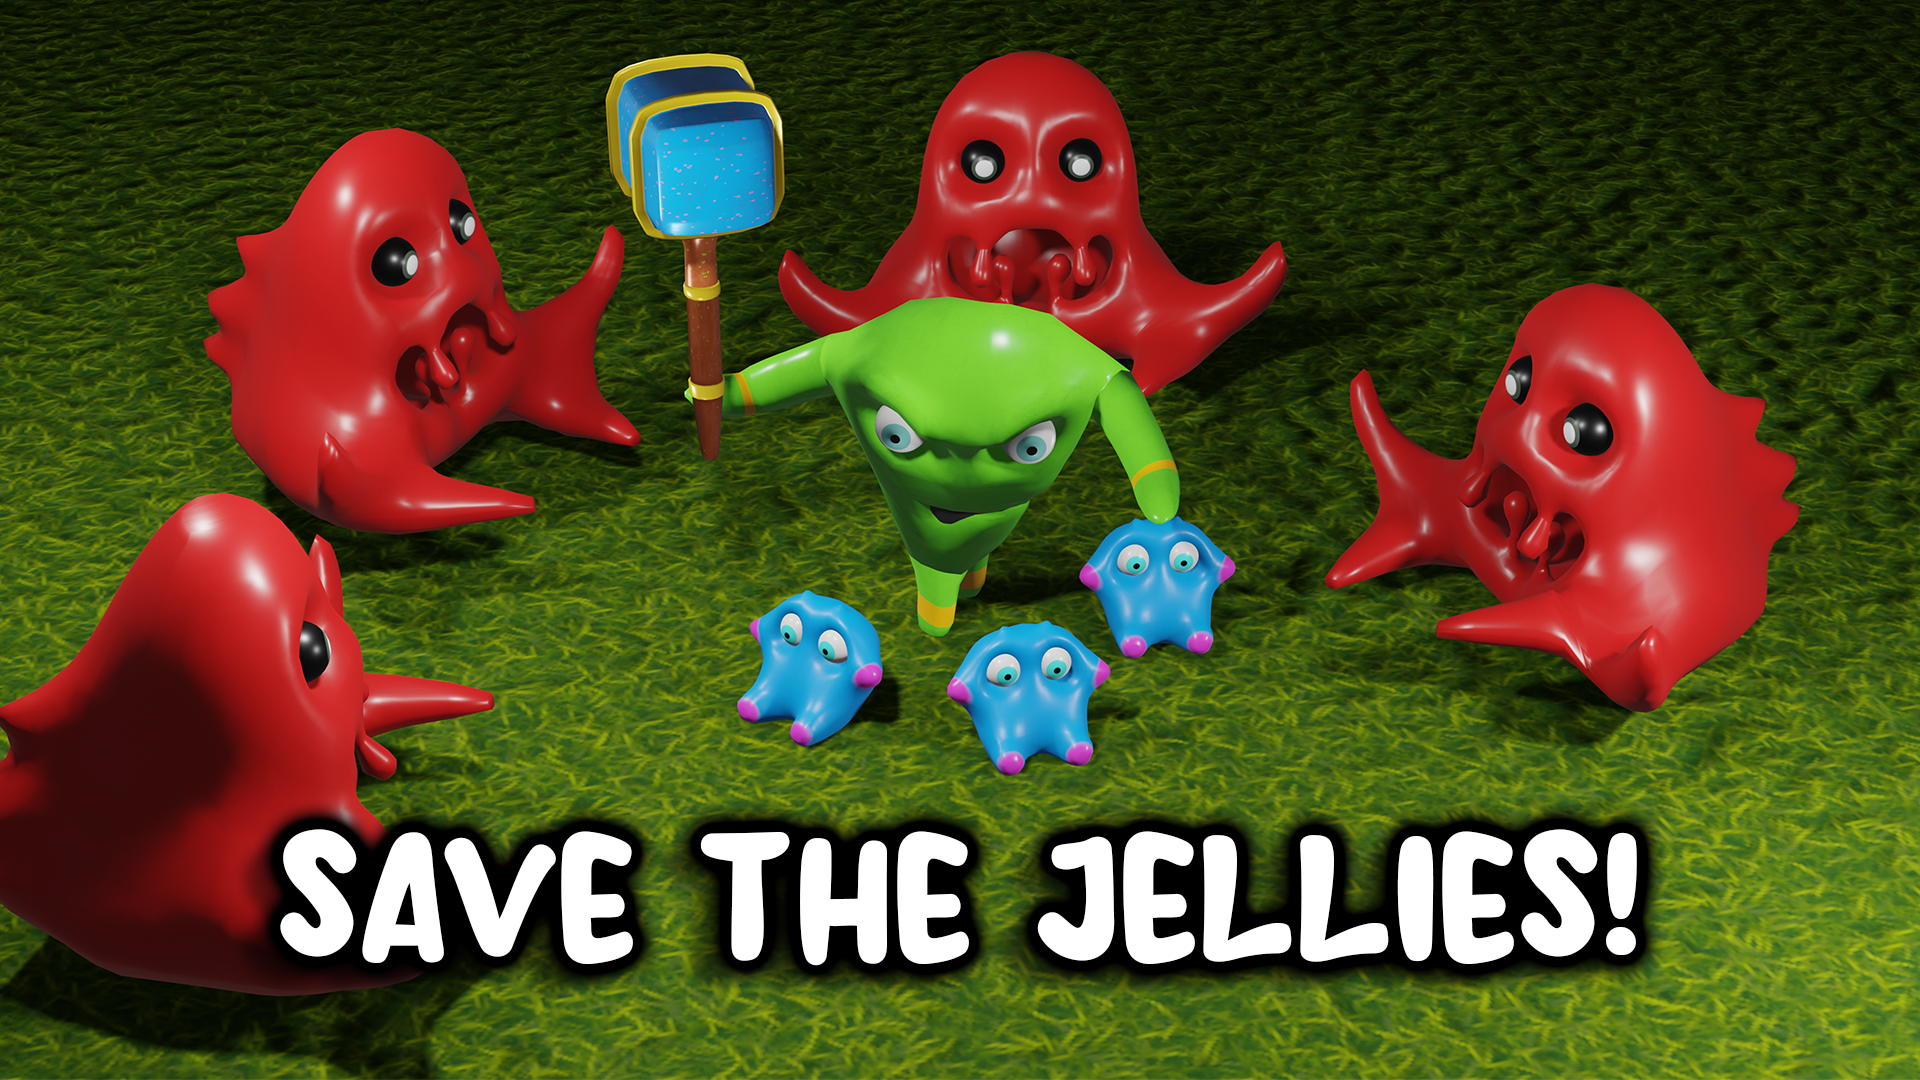 Save The Jellies!